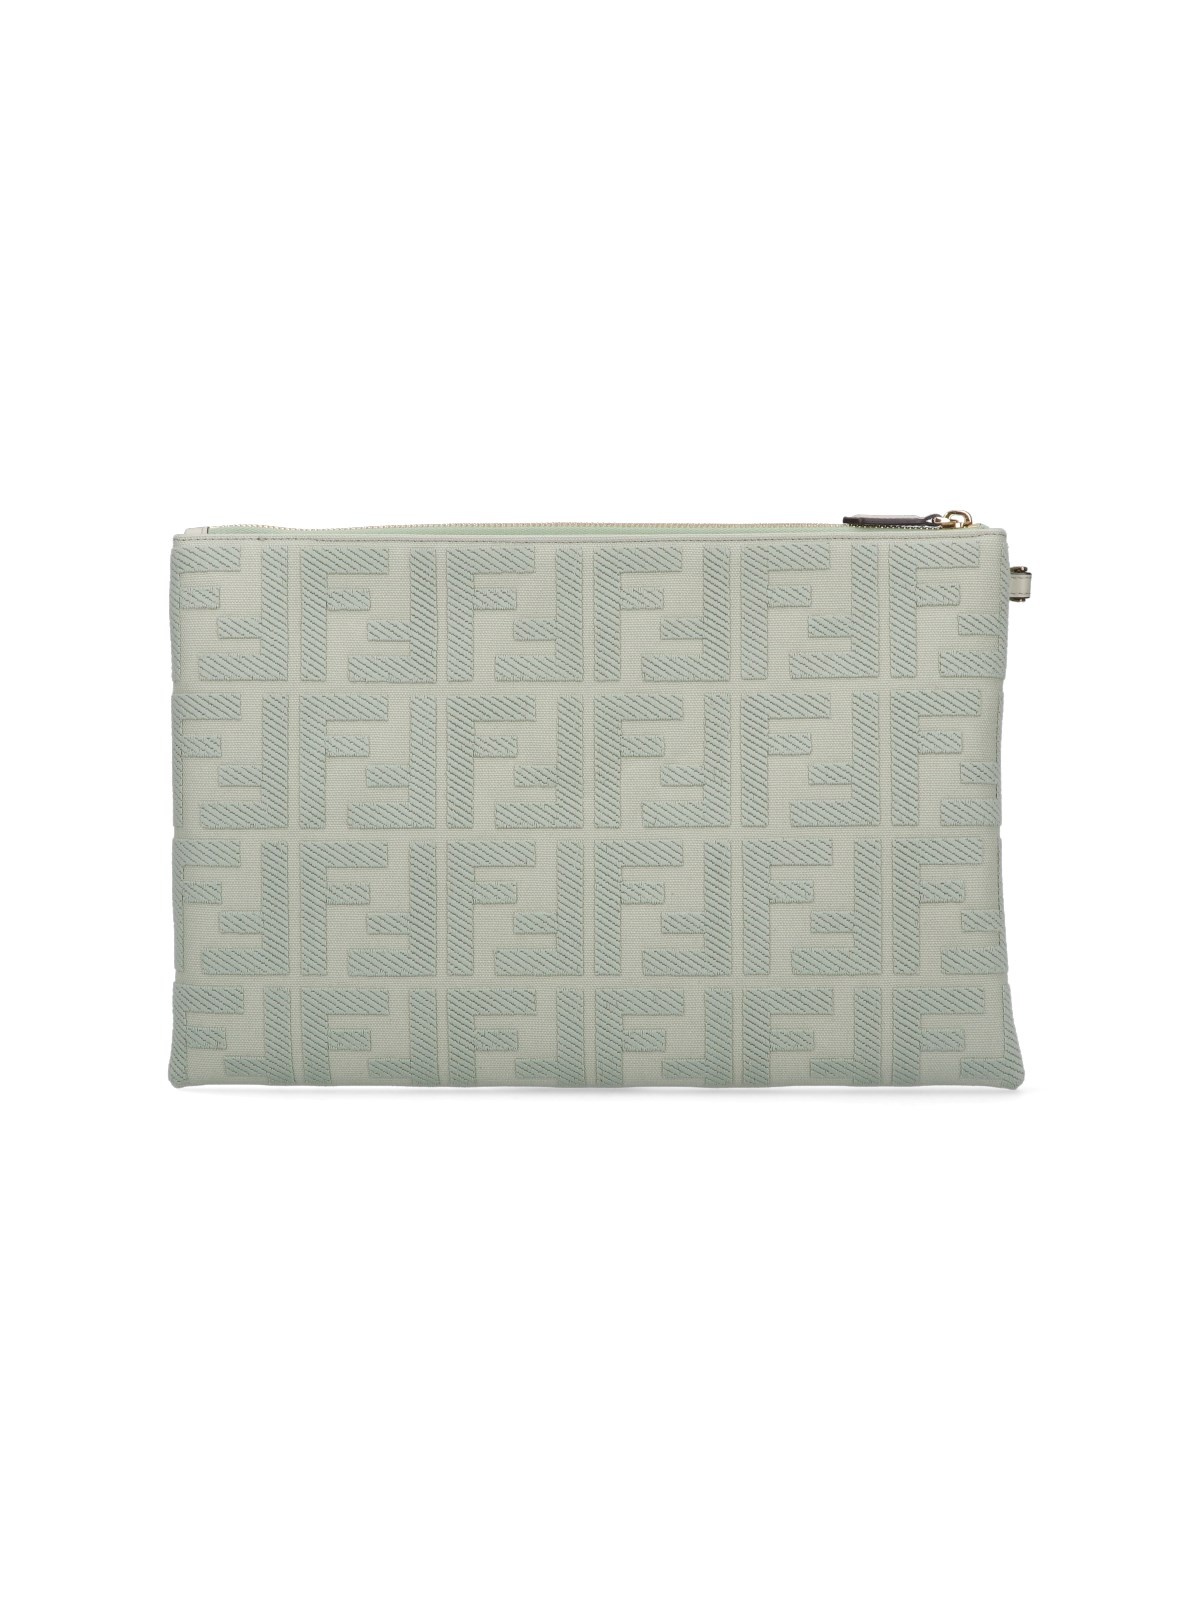 'FF' LARGE FLAT POUCH - 3